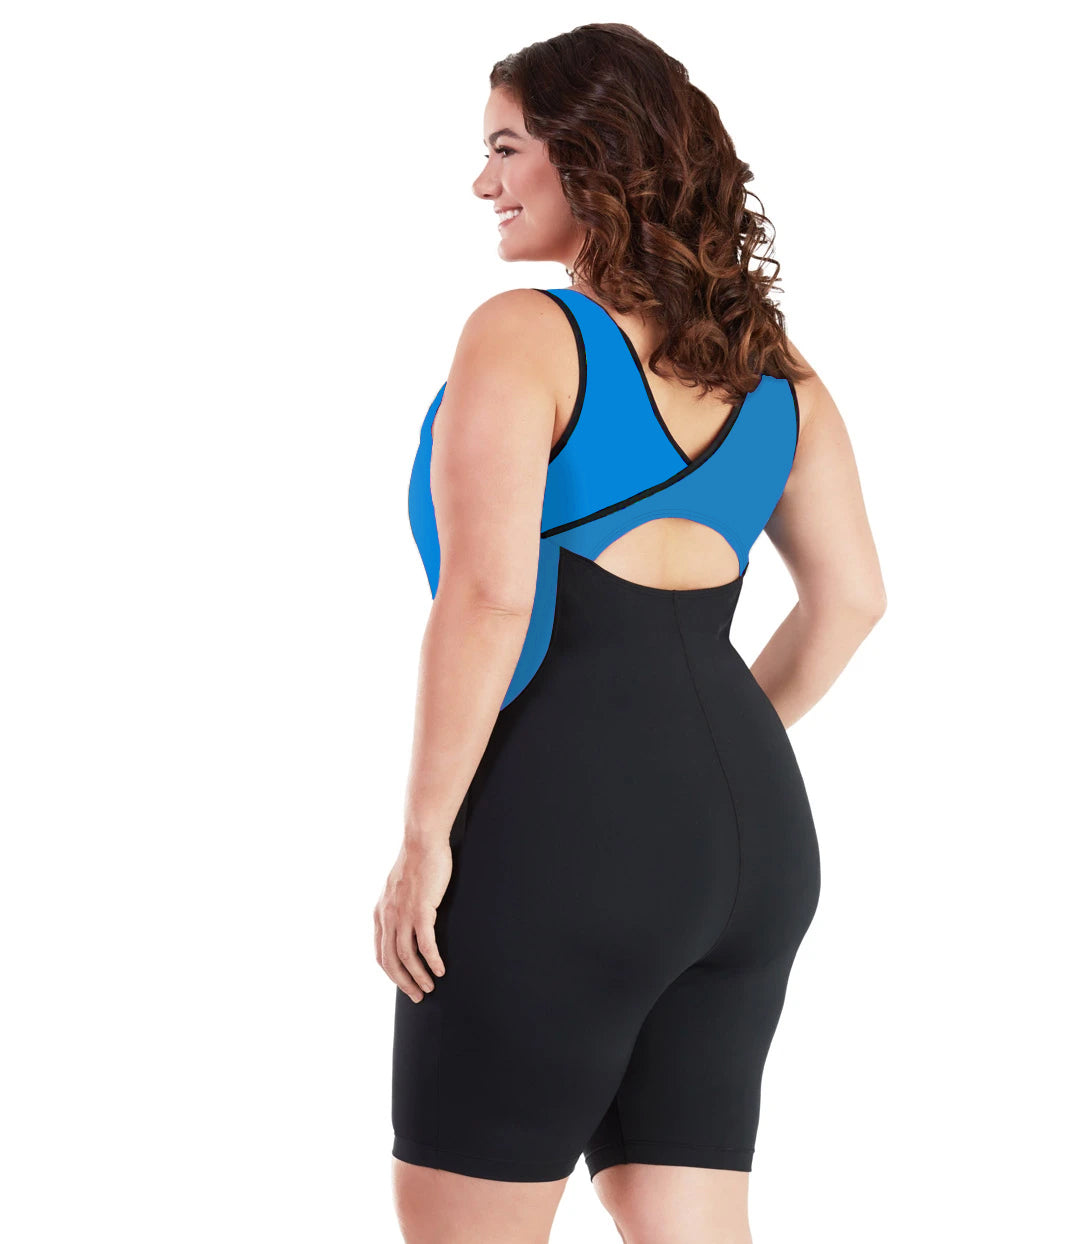 Plus size woman, back view, wearing JunoActive plus size AquaSport Crossback Aquatard Pacific Blue Black. The overlapping crossback and side blocking detail of the tanksuit is blue. The main body of the suit is solid black, keyhole opening at the mid-back. The leg hits a few inches above the knee.